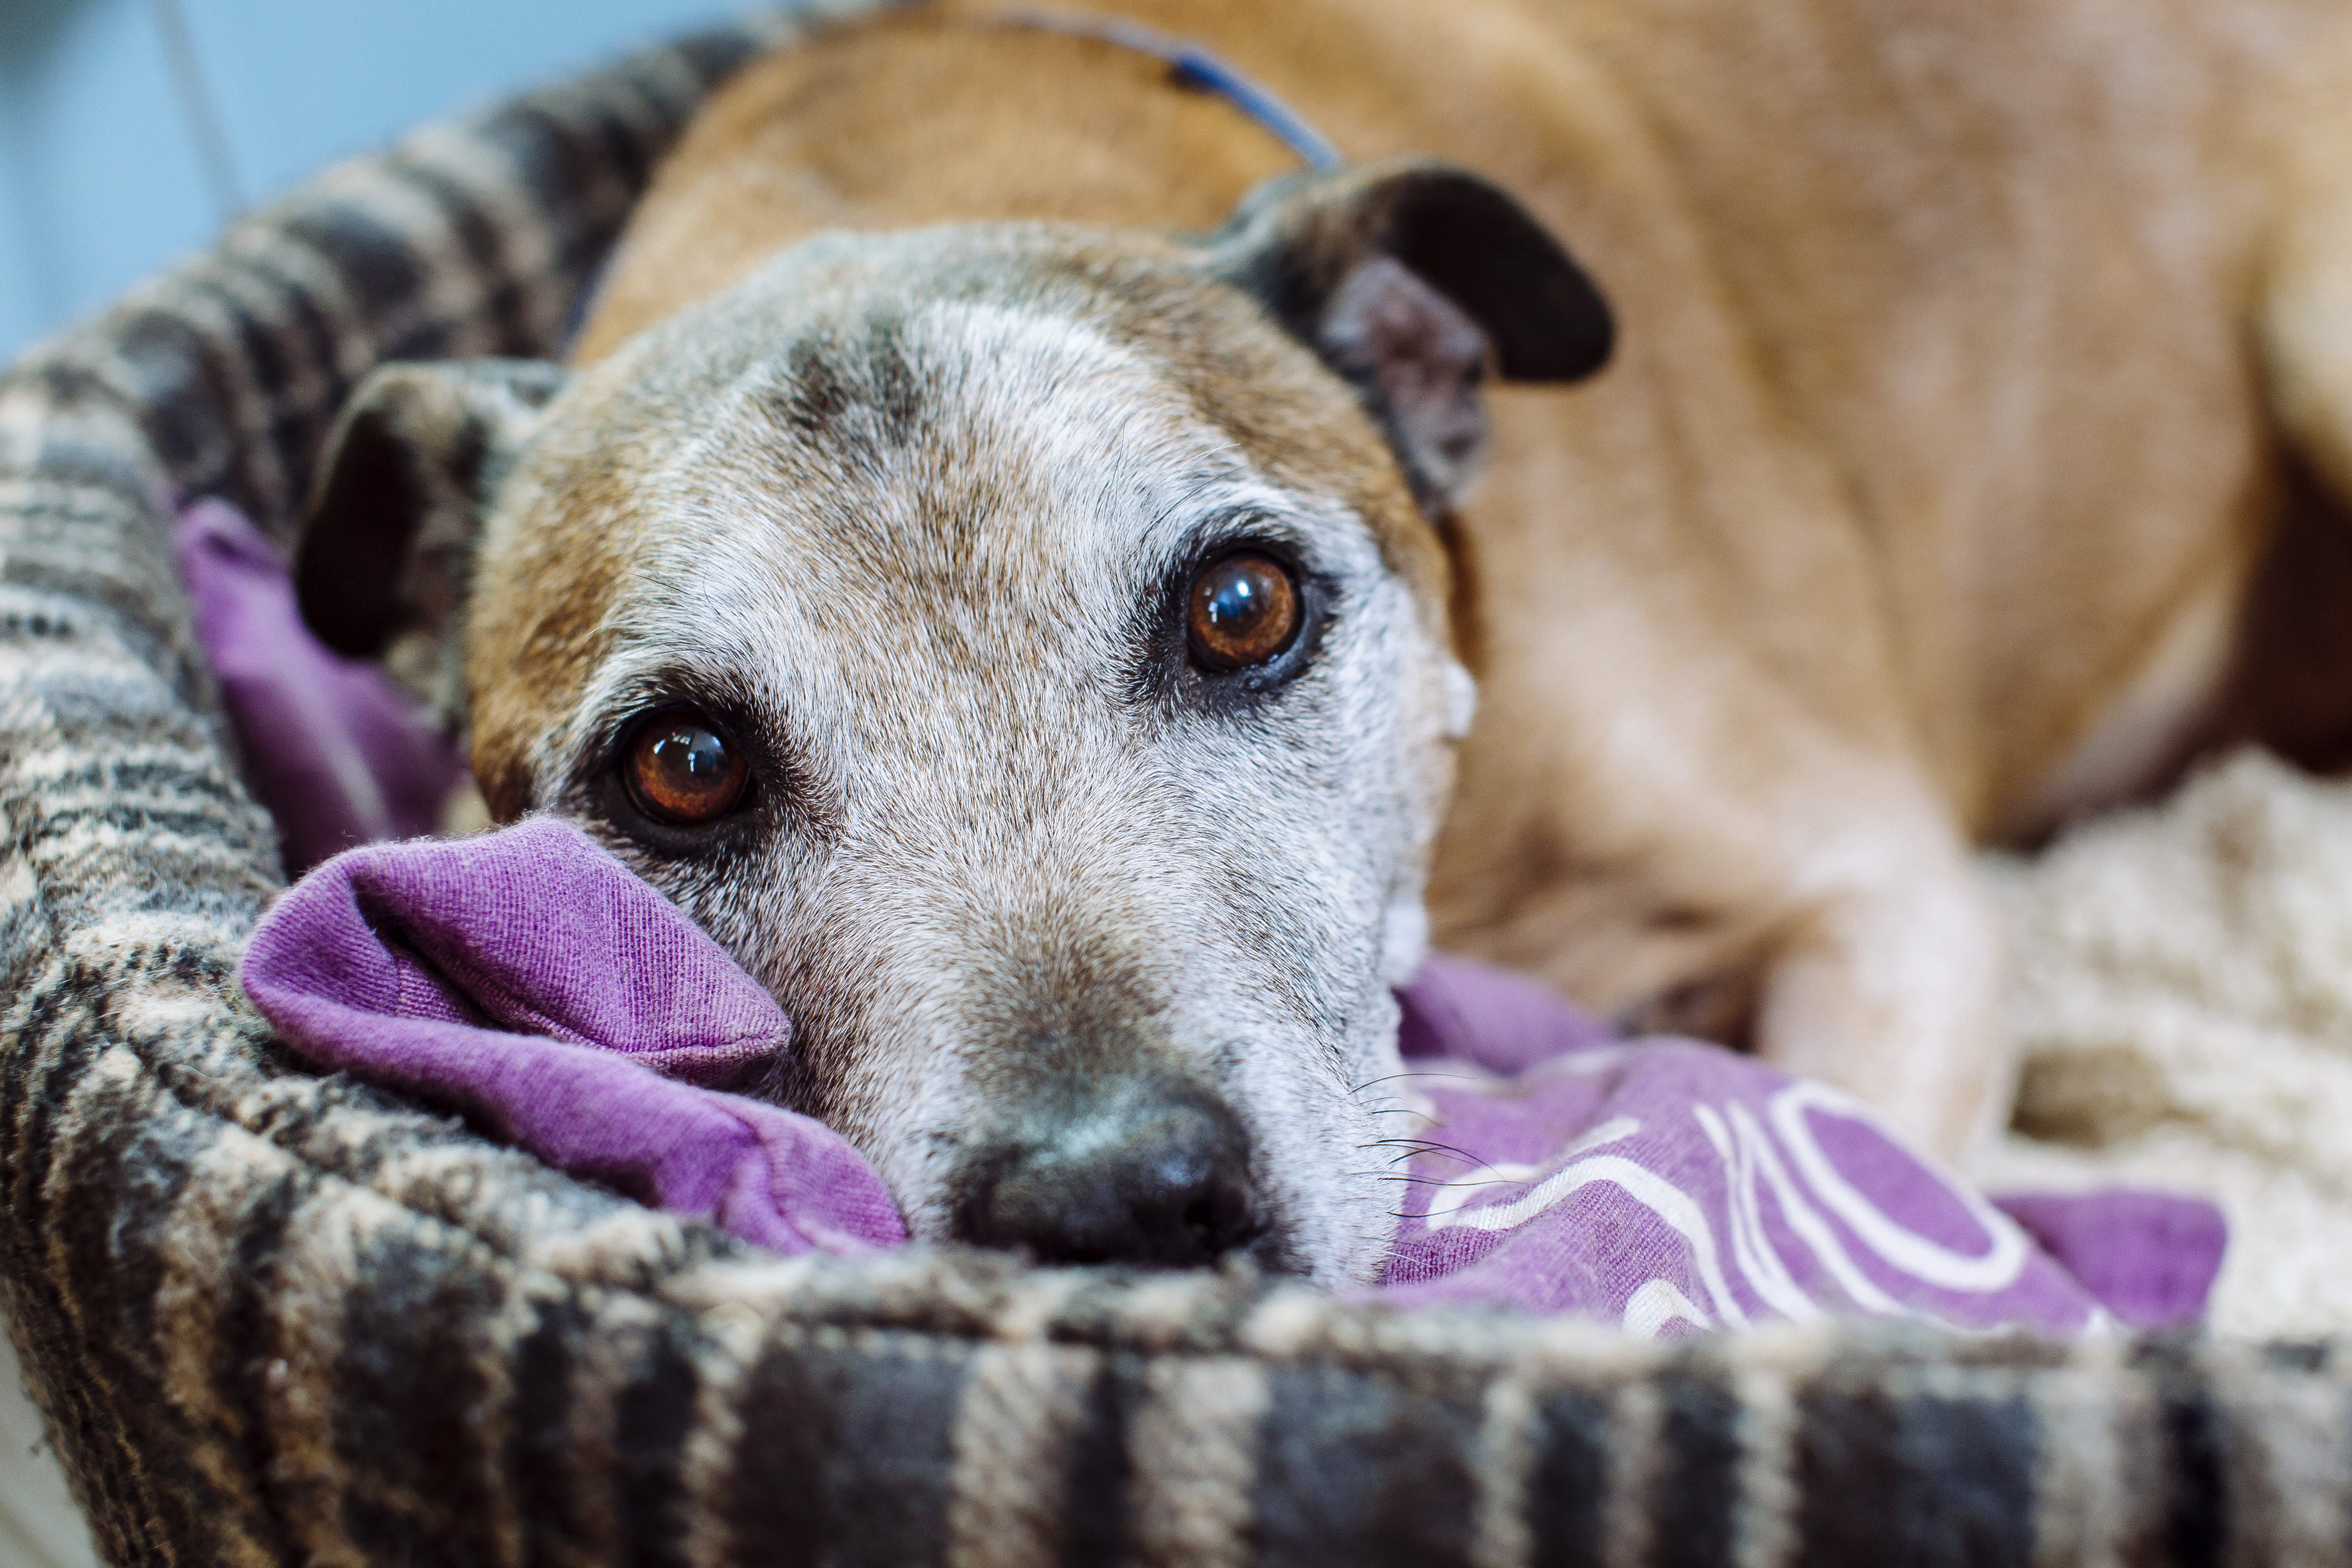 A sad looking dog in his bed (Helen Yates/Blue Cross/PA)